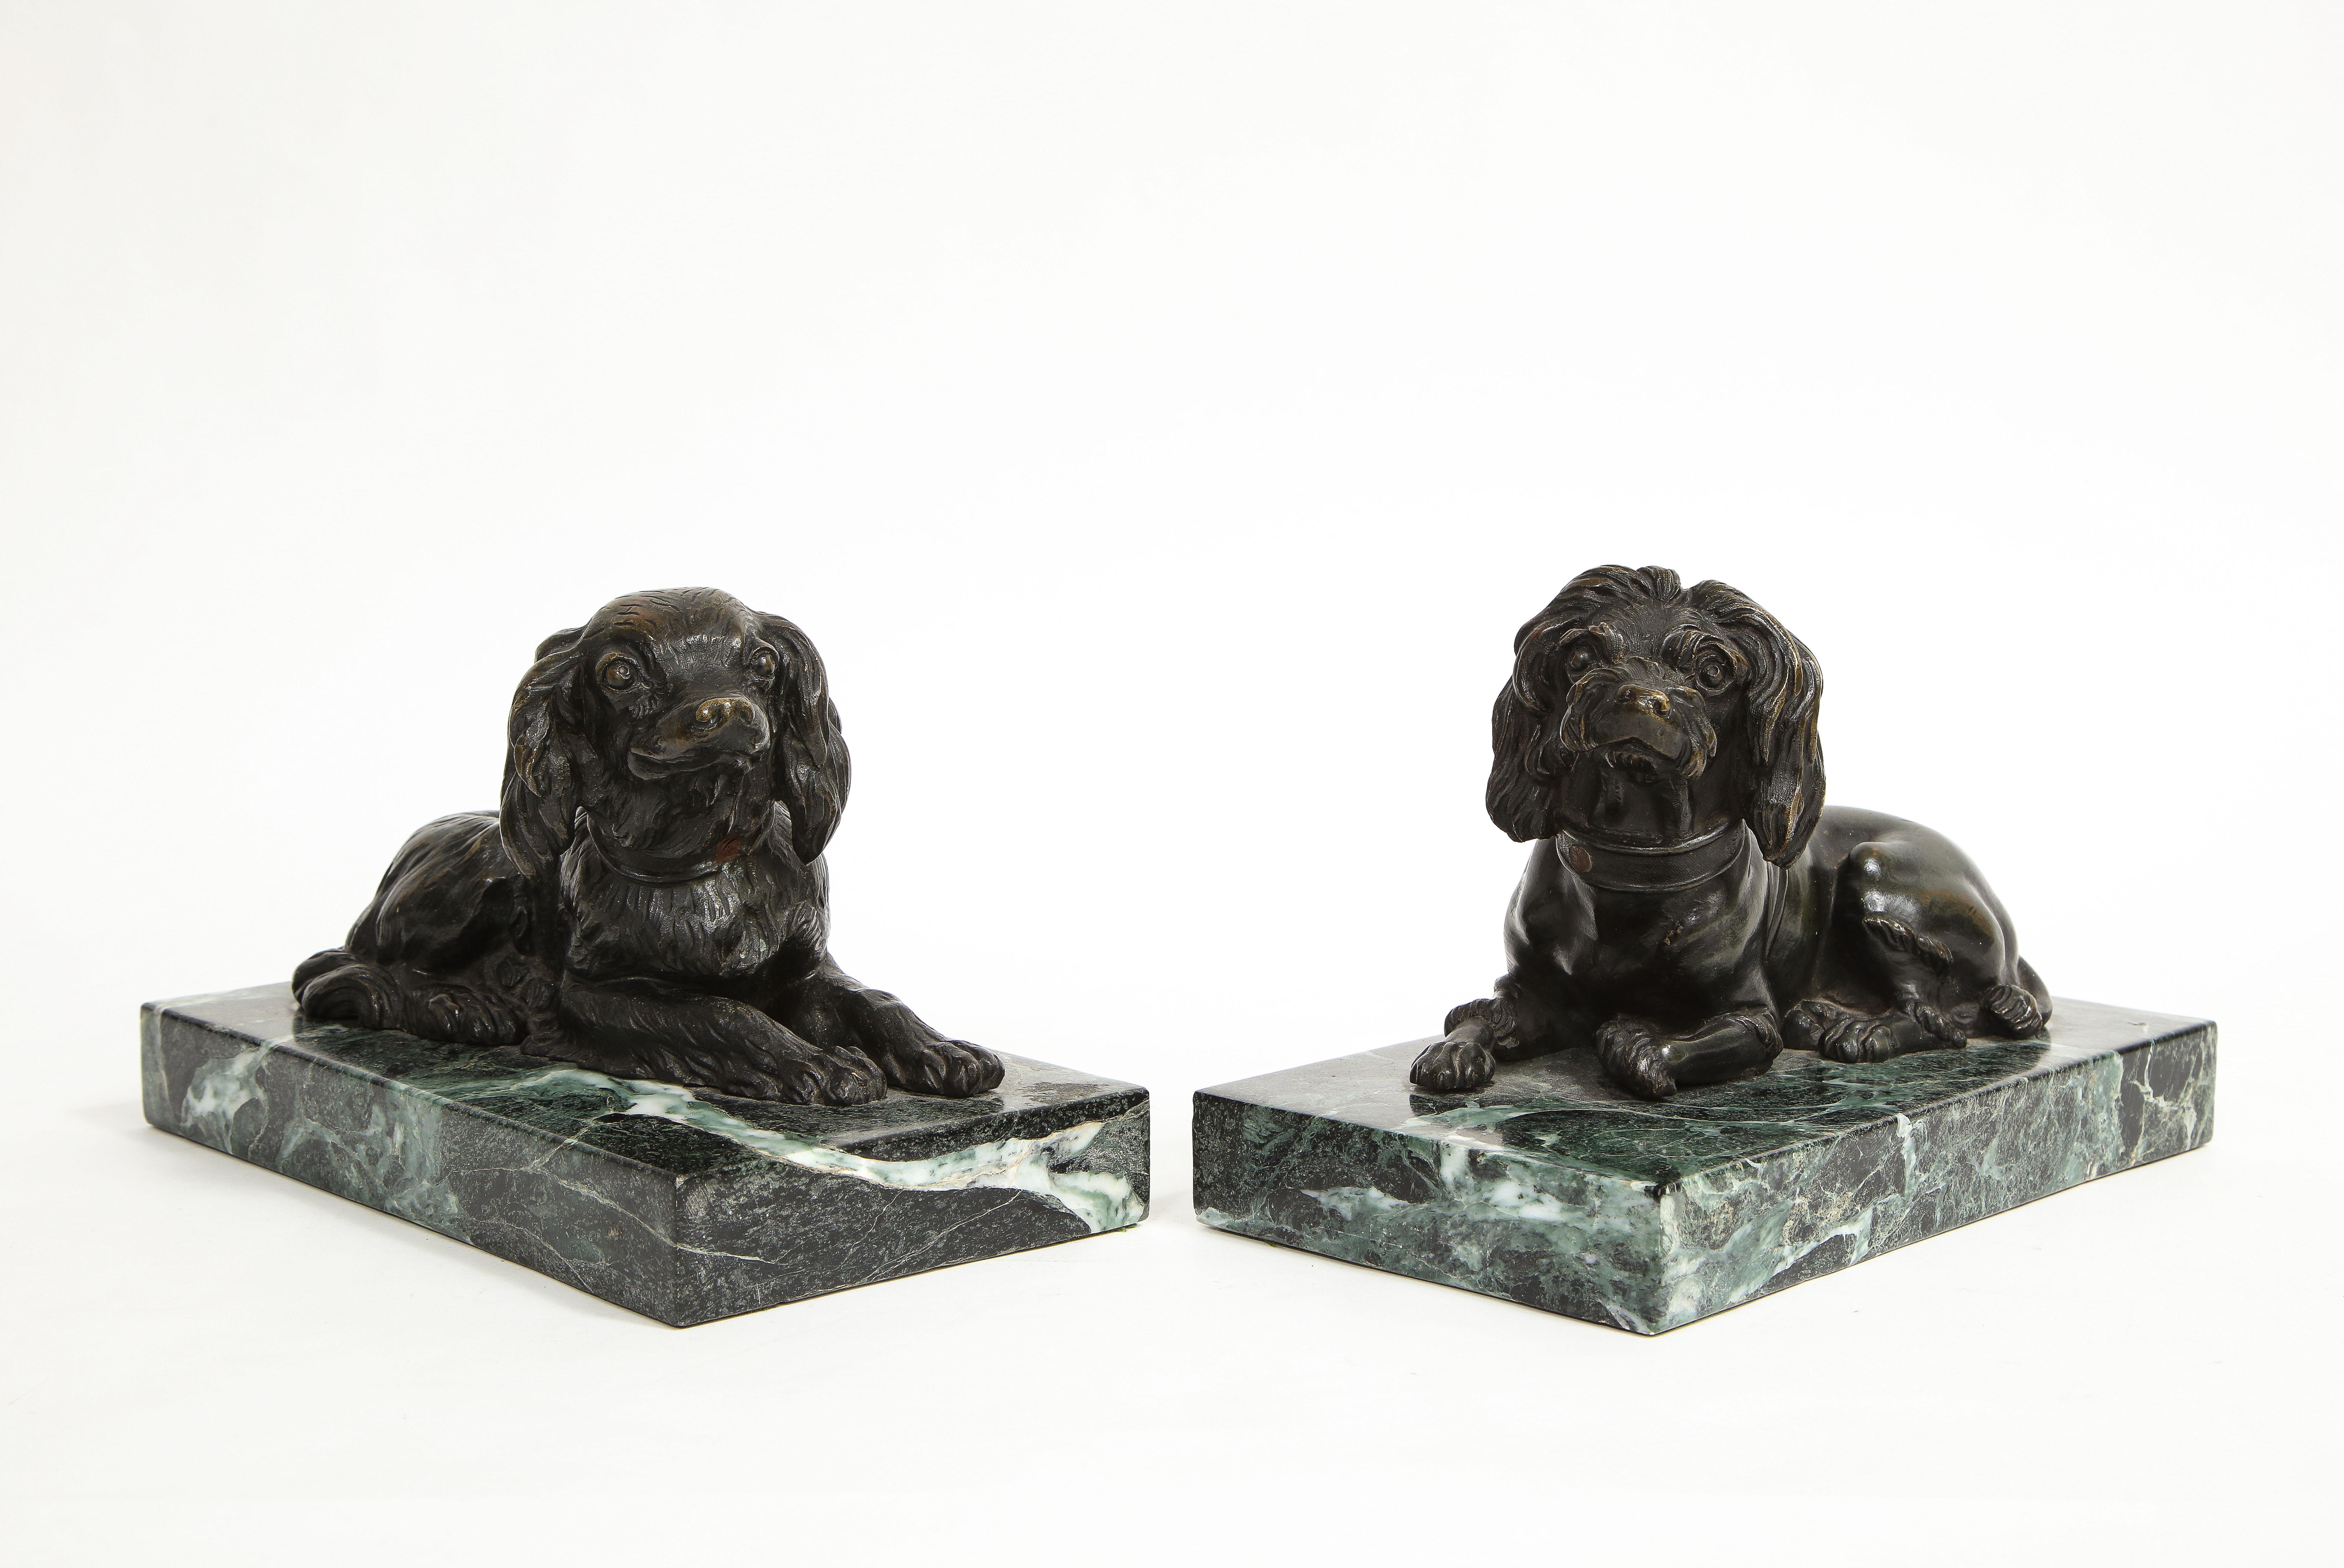 A Beautiful Pair of Italian 19th Century Grand Tour Patinated Bronze Dogs on Green Marble Bases. Each dog is beautifully cast, hand-chassed, and hand-chiseled. They are life-like in appearance, each with flowing fur and delicate smiles. They are